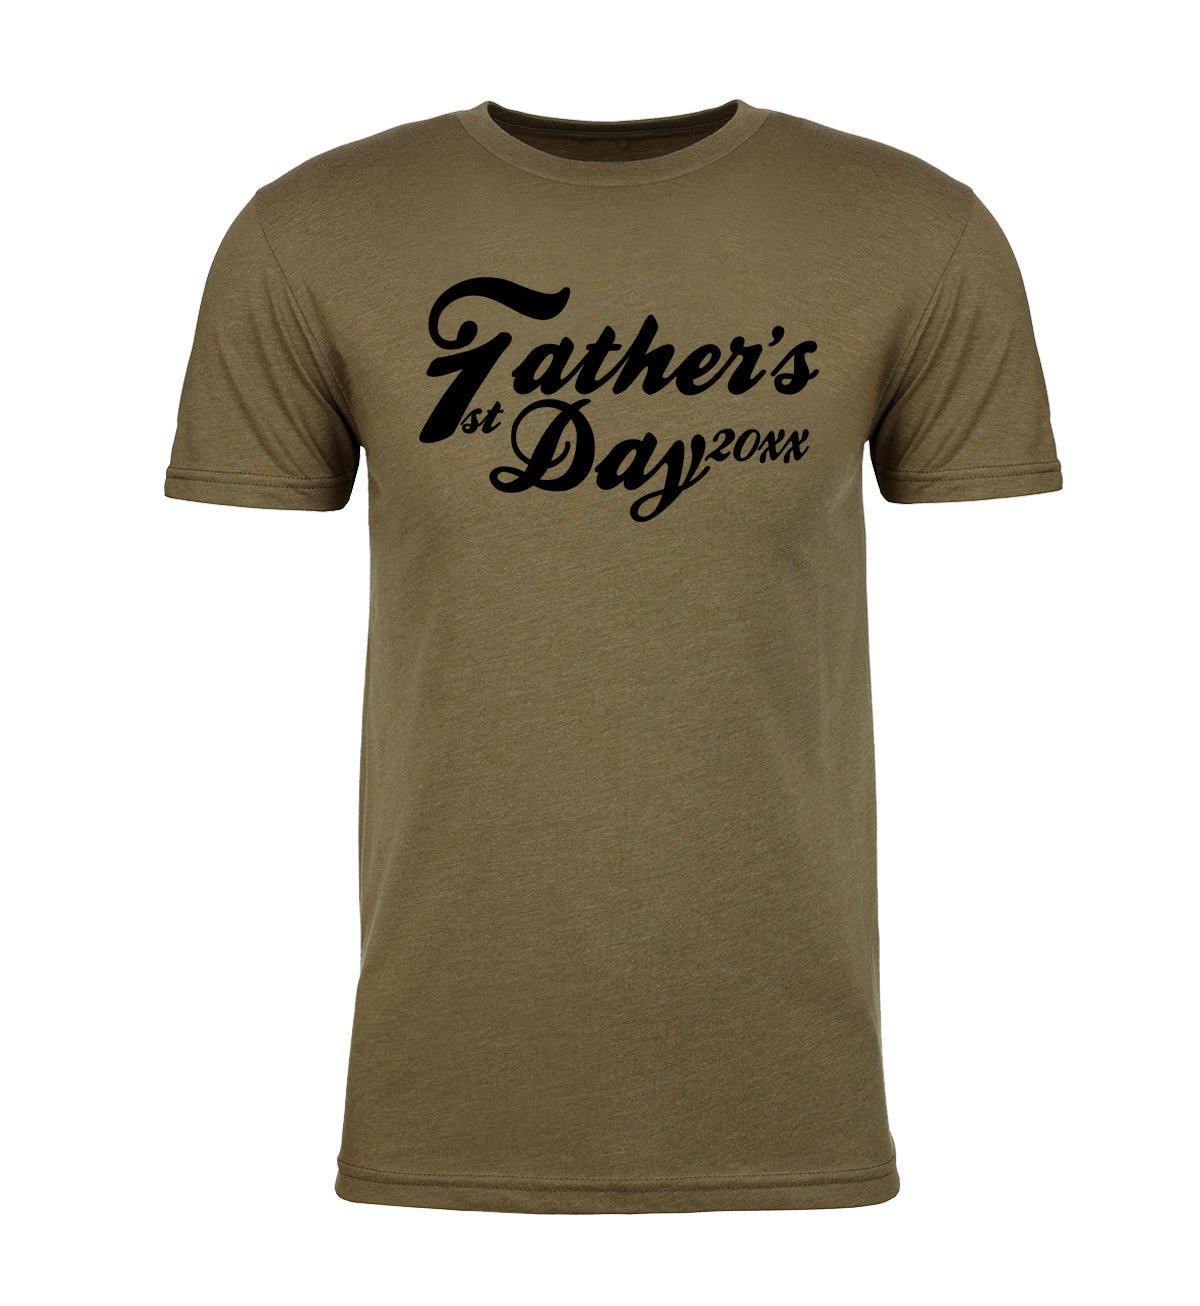 Shirt - First Father's Day T Shirt With Custom Year, Personalized Dad Shirts